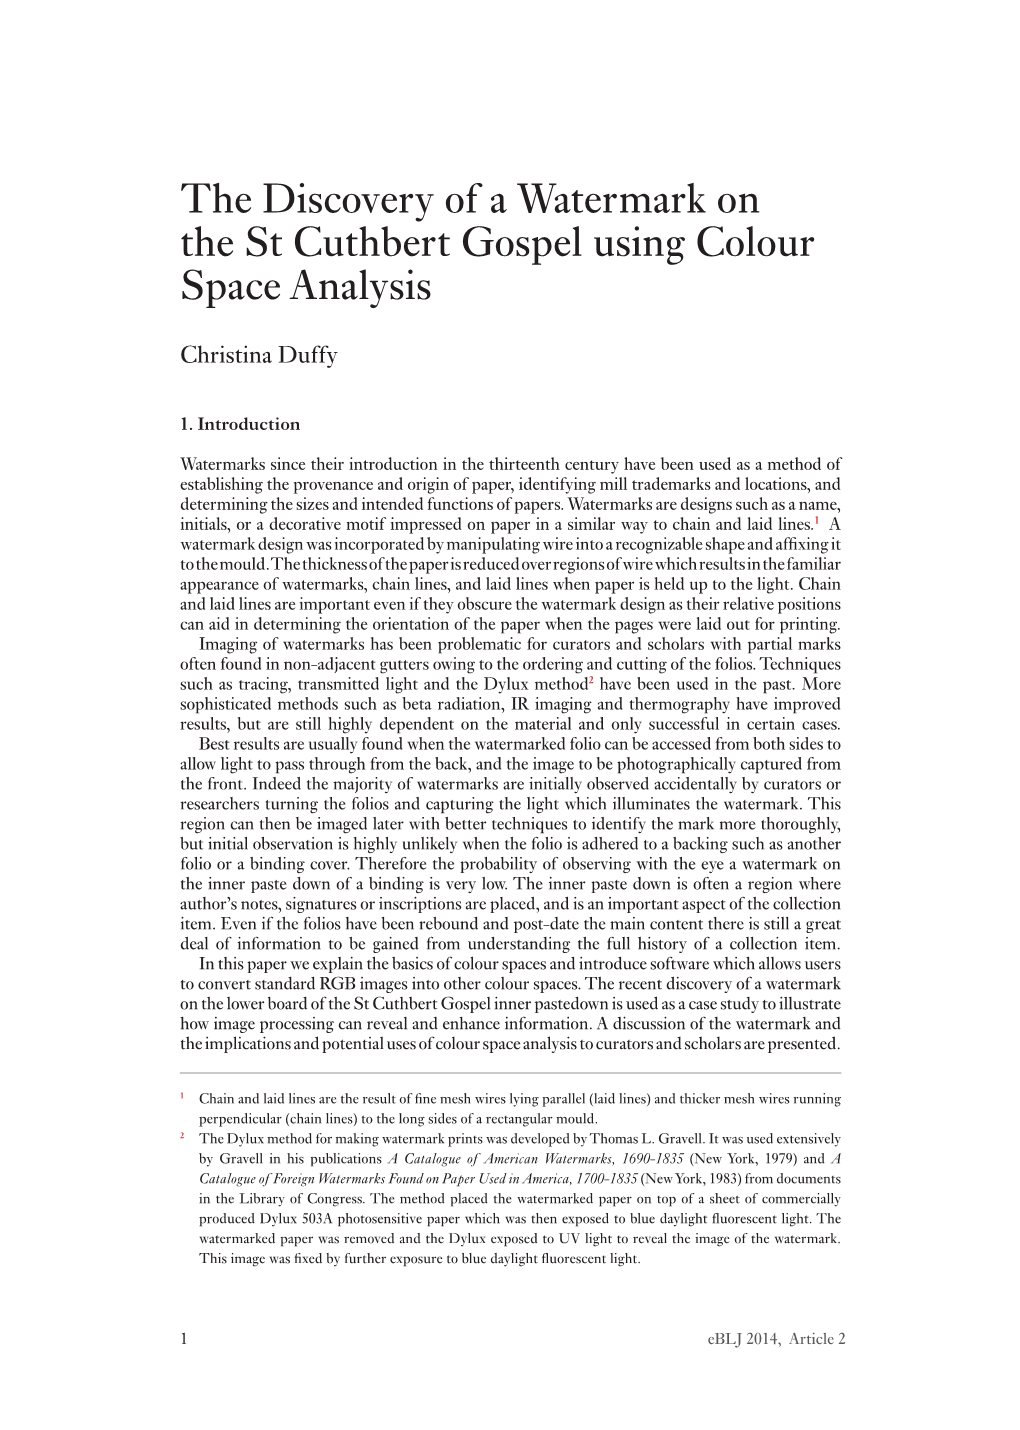 The Discovery of a Watermark on the St Cuthbert Gospel Using Colour Space Analysis